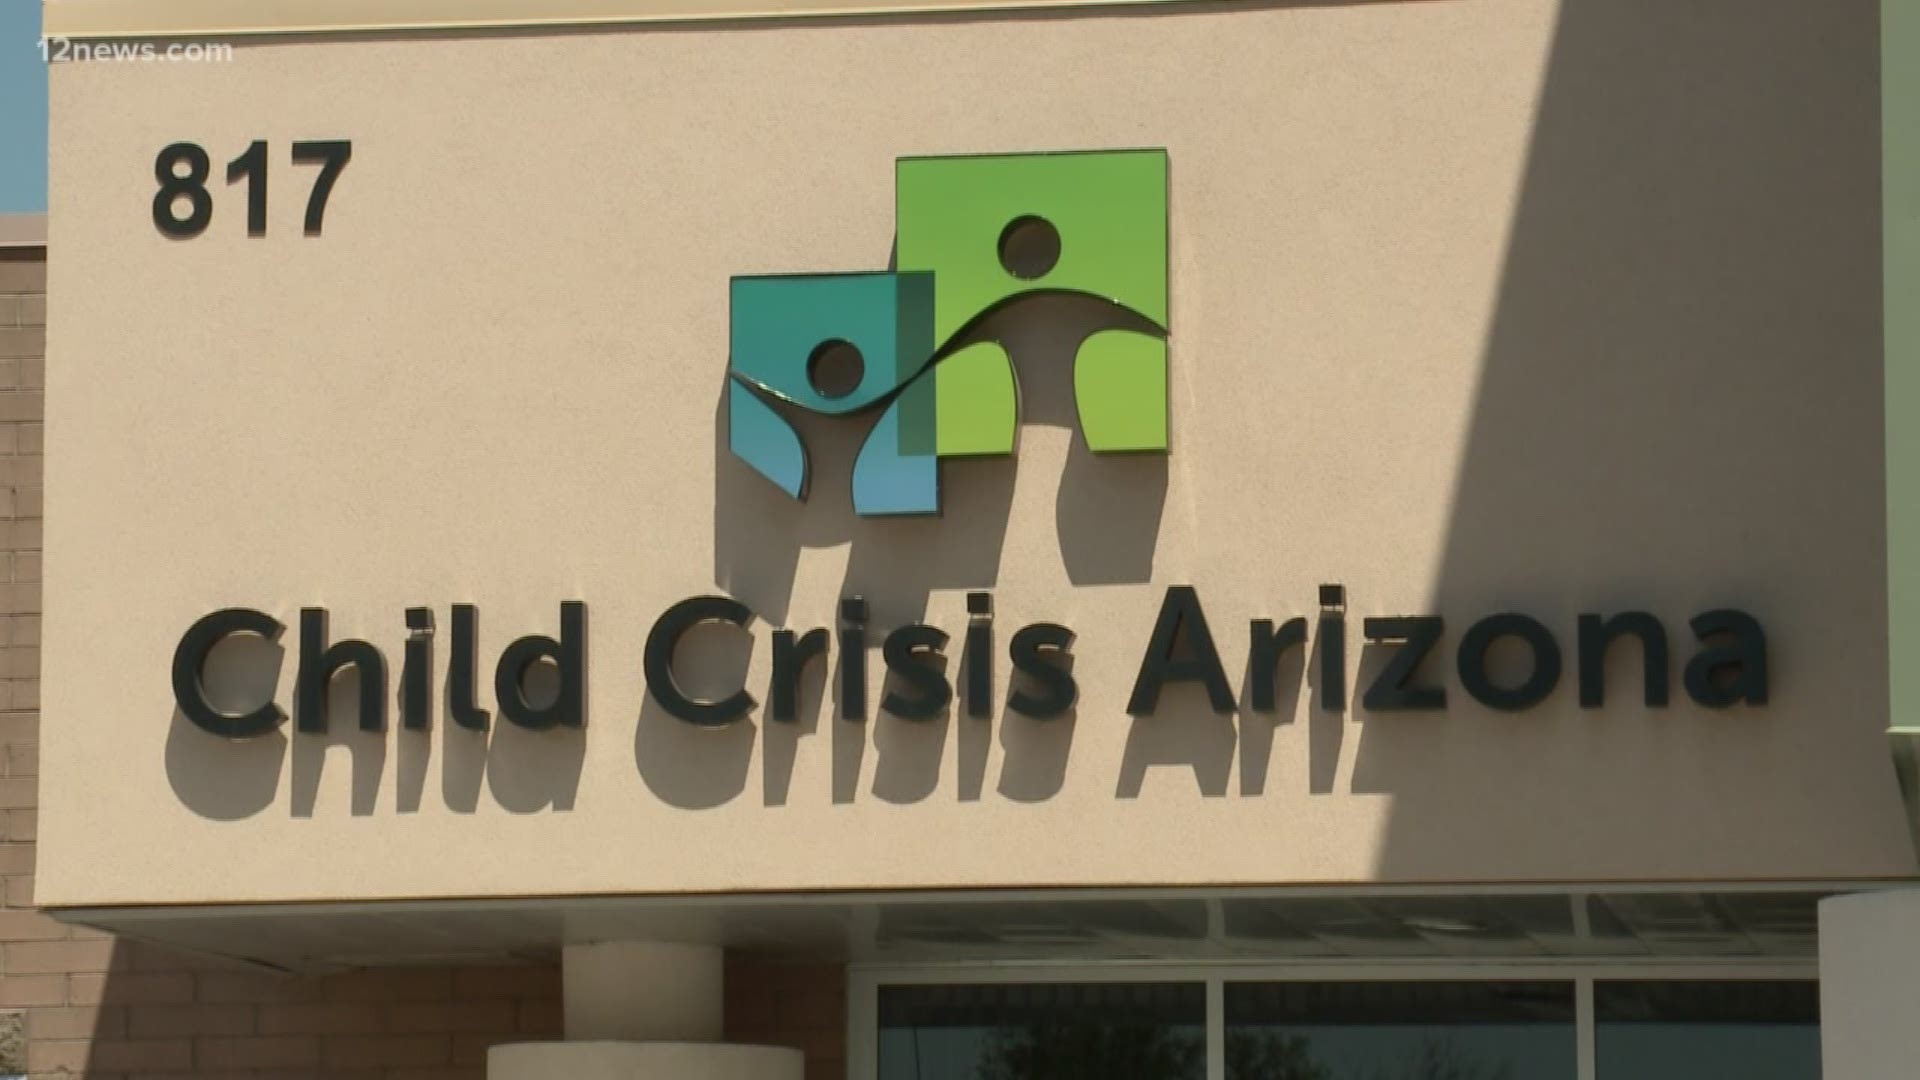 The idea that babies are being separated from their parents gets a lot of people very upset, including Torrie Taj. Taj says her agency, Child Crisis Arizona, has served children for decades and these migrant children are quickly reunified with family or friends.